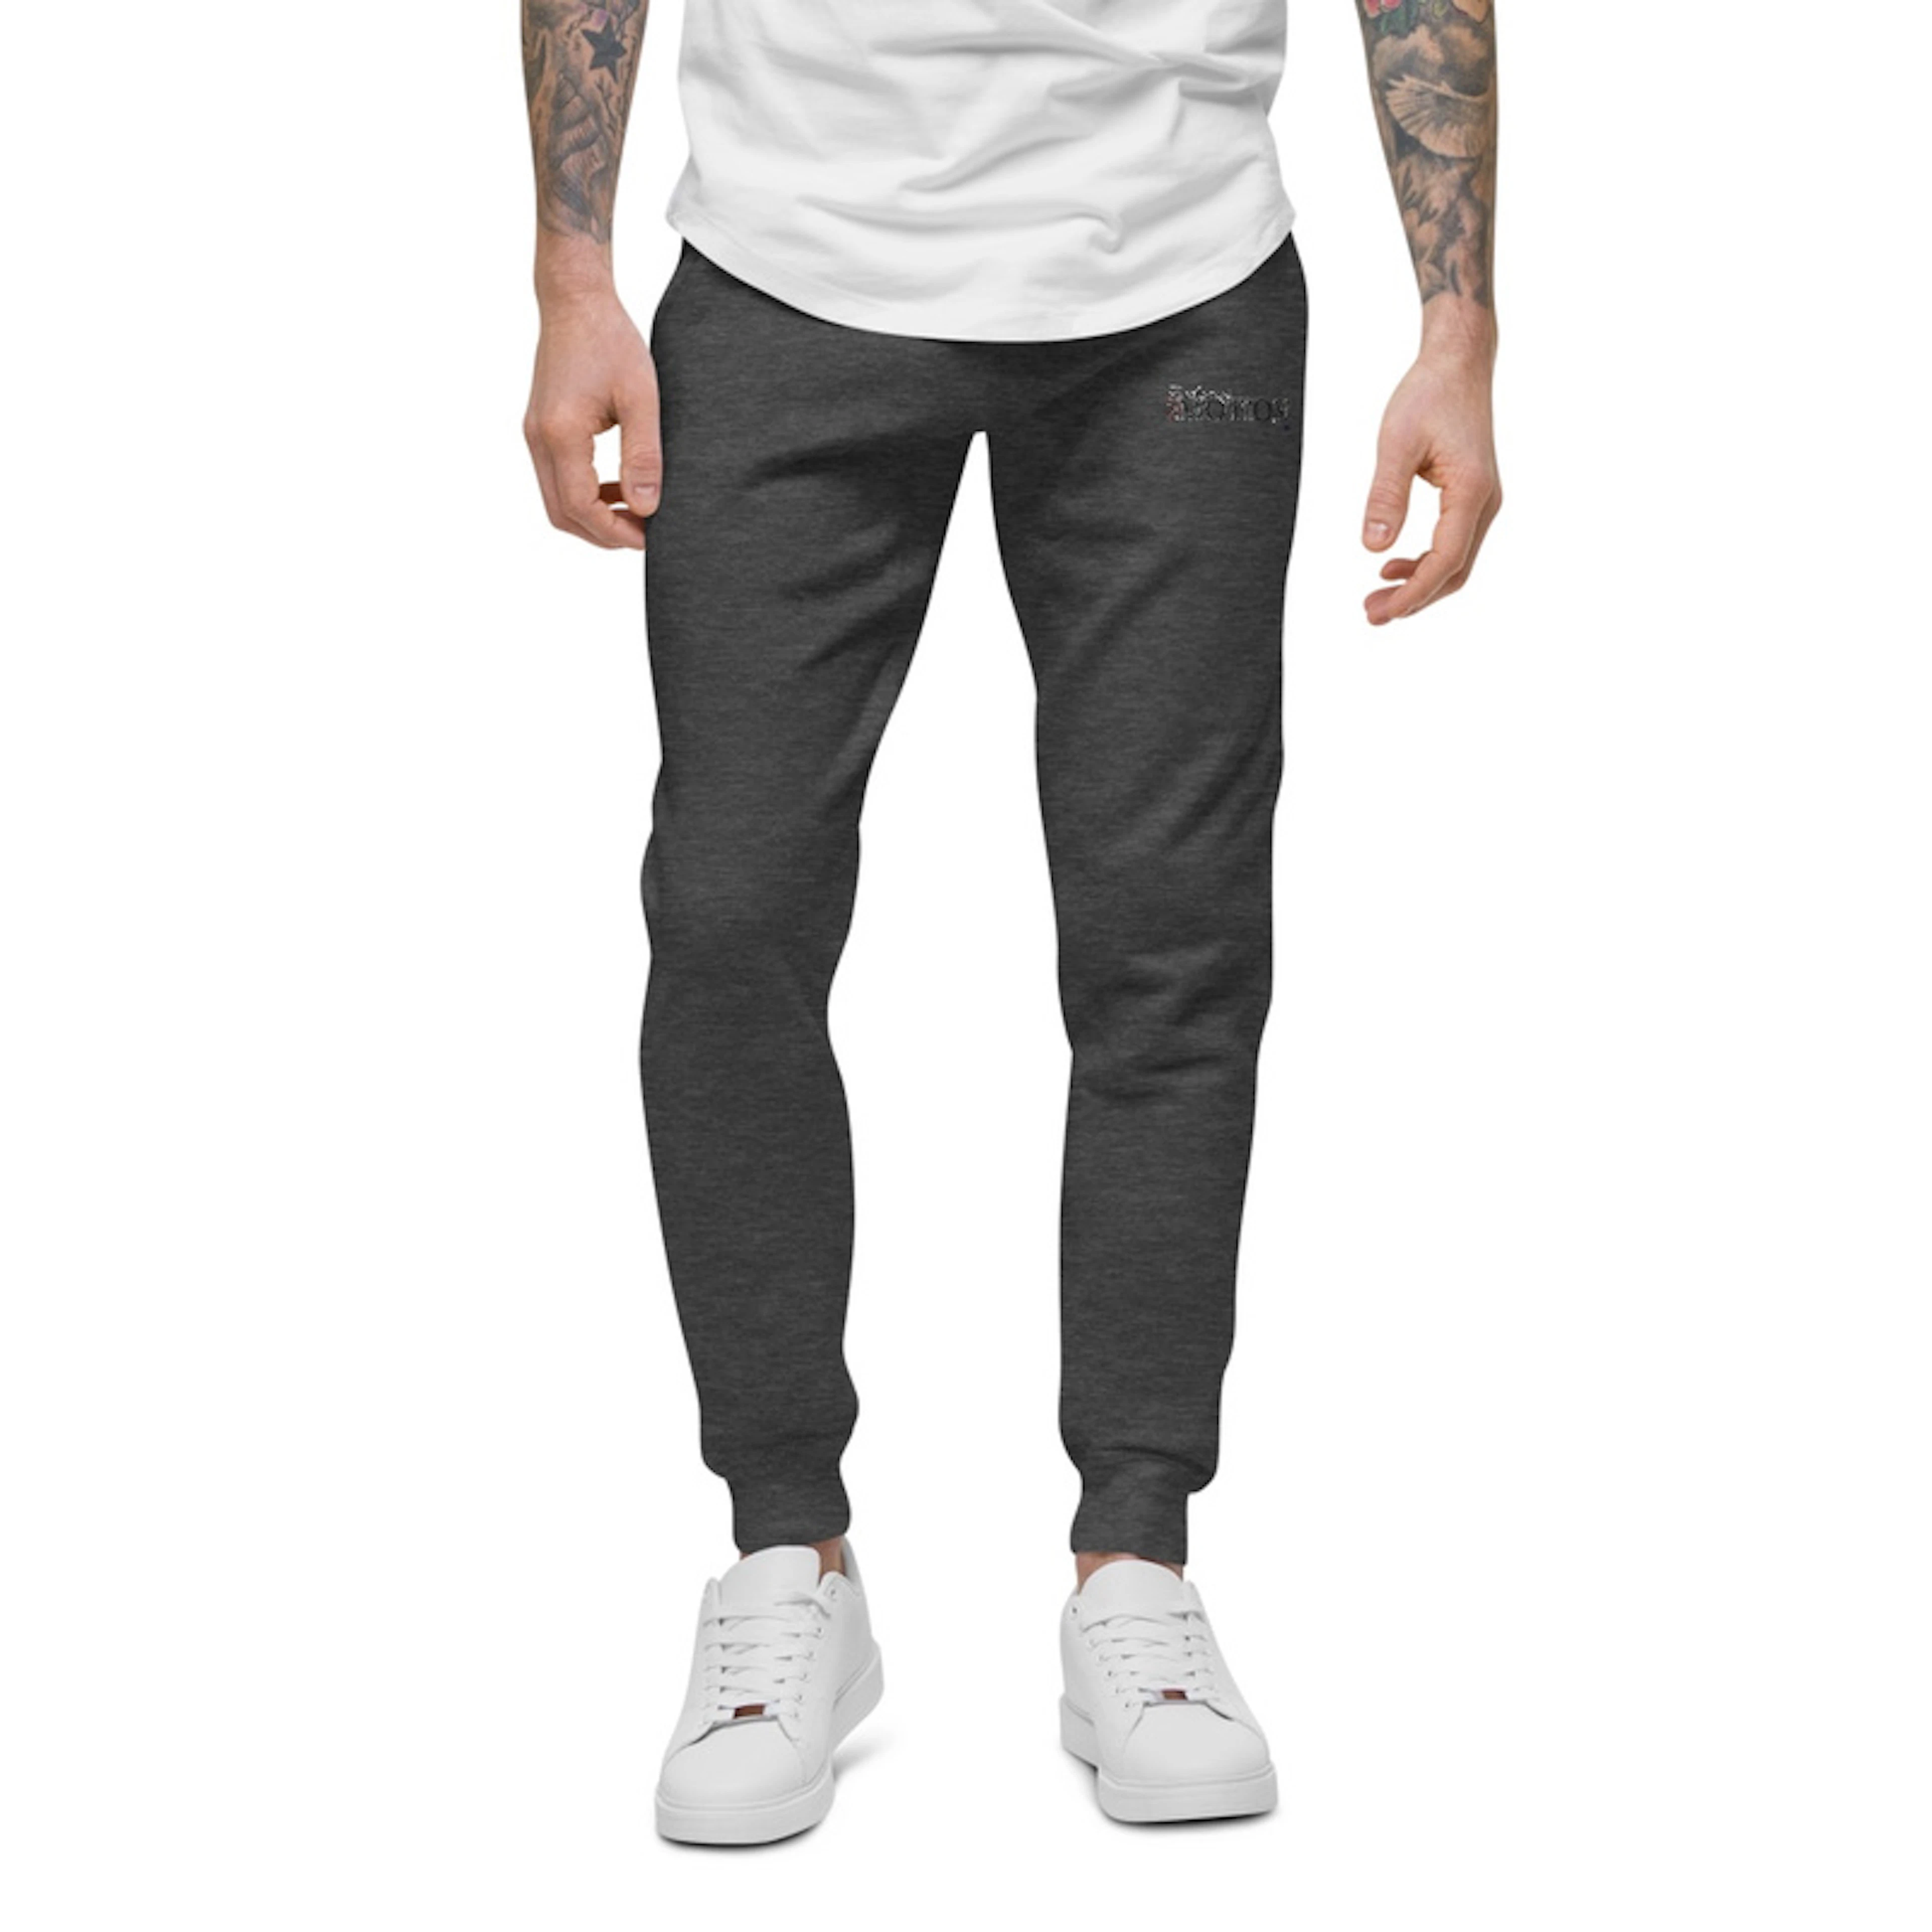 Find your Motion grey stitch joggers